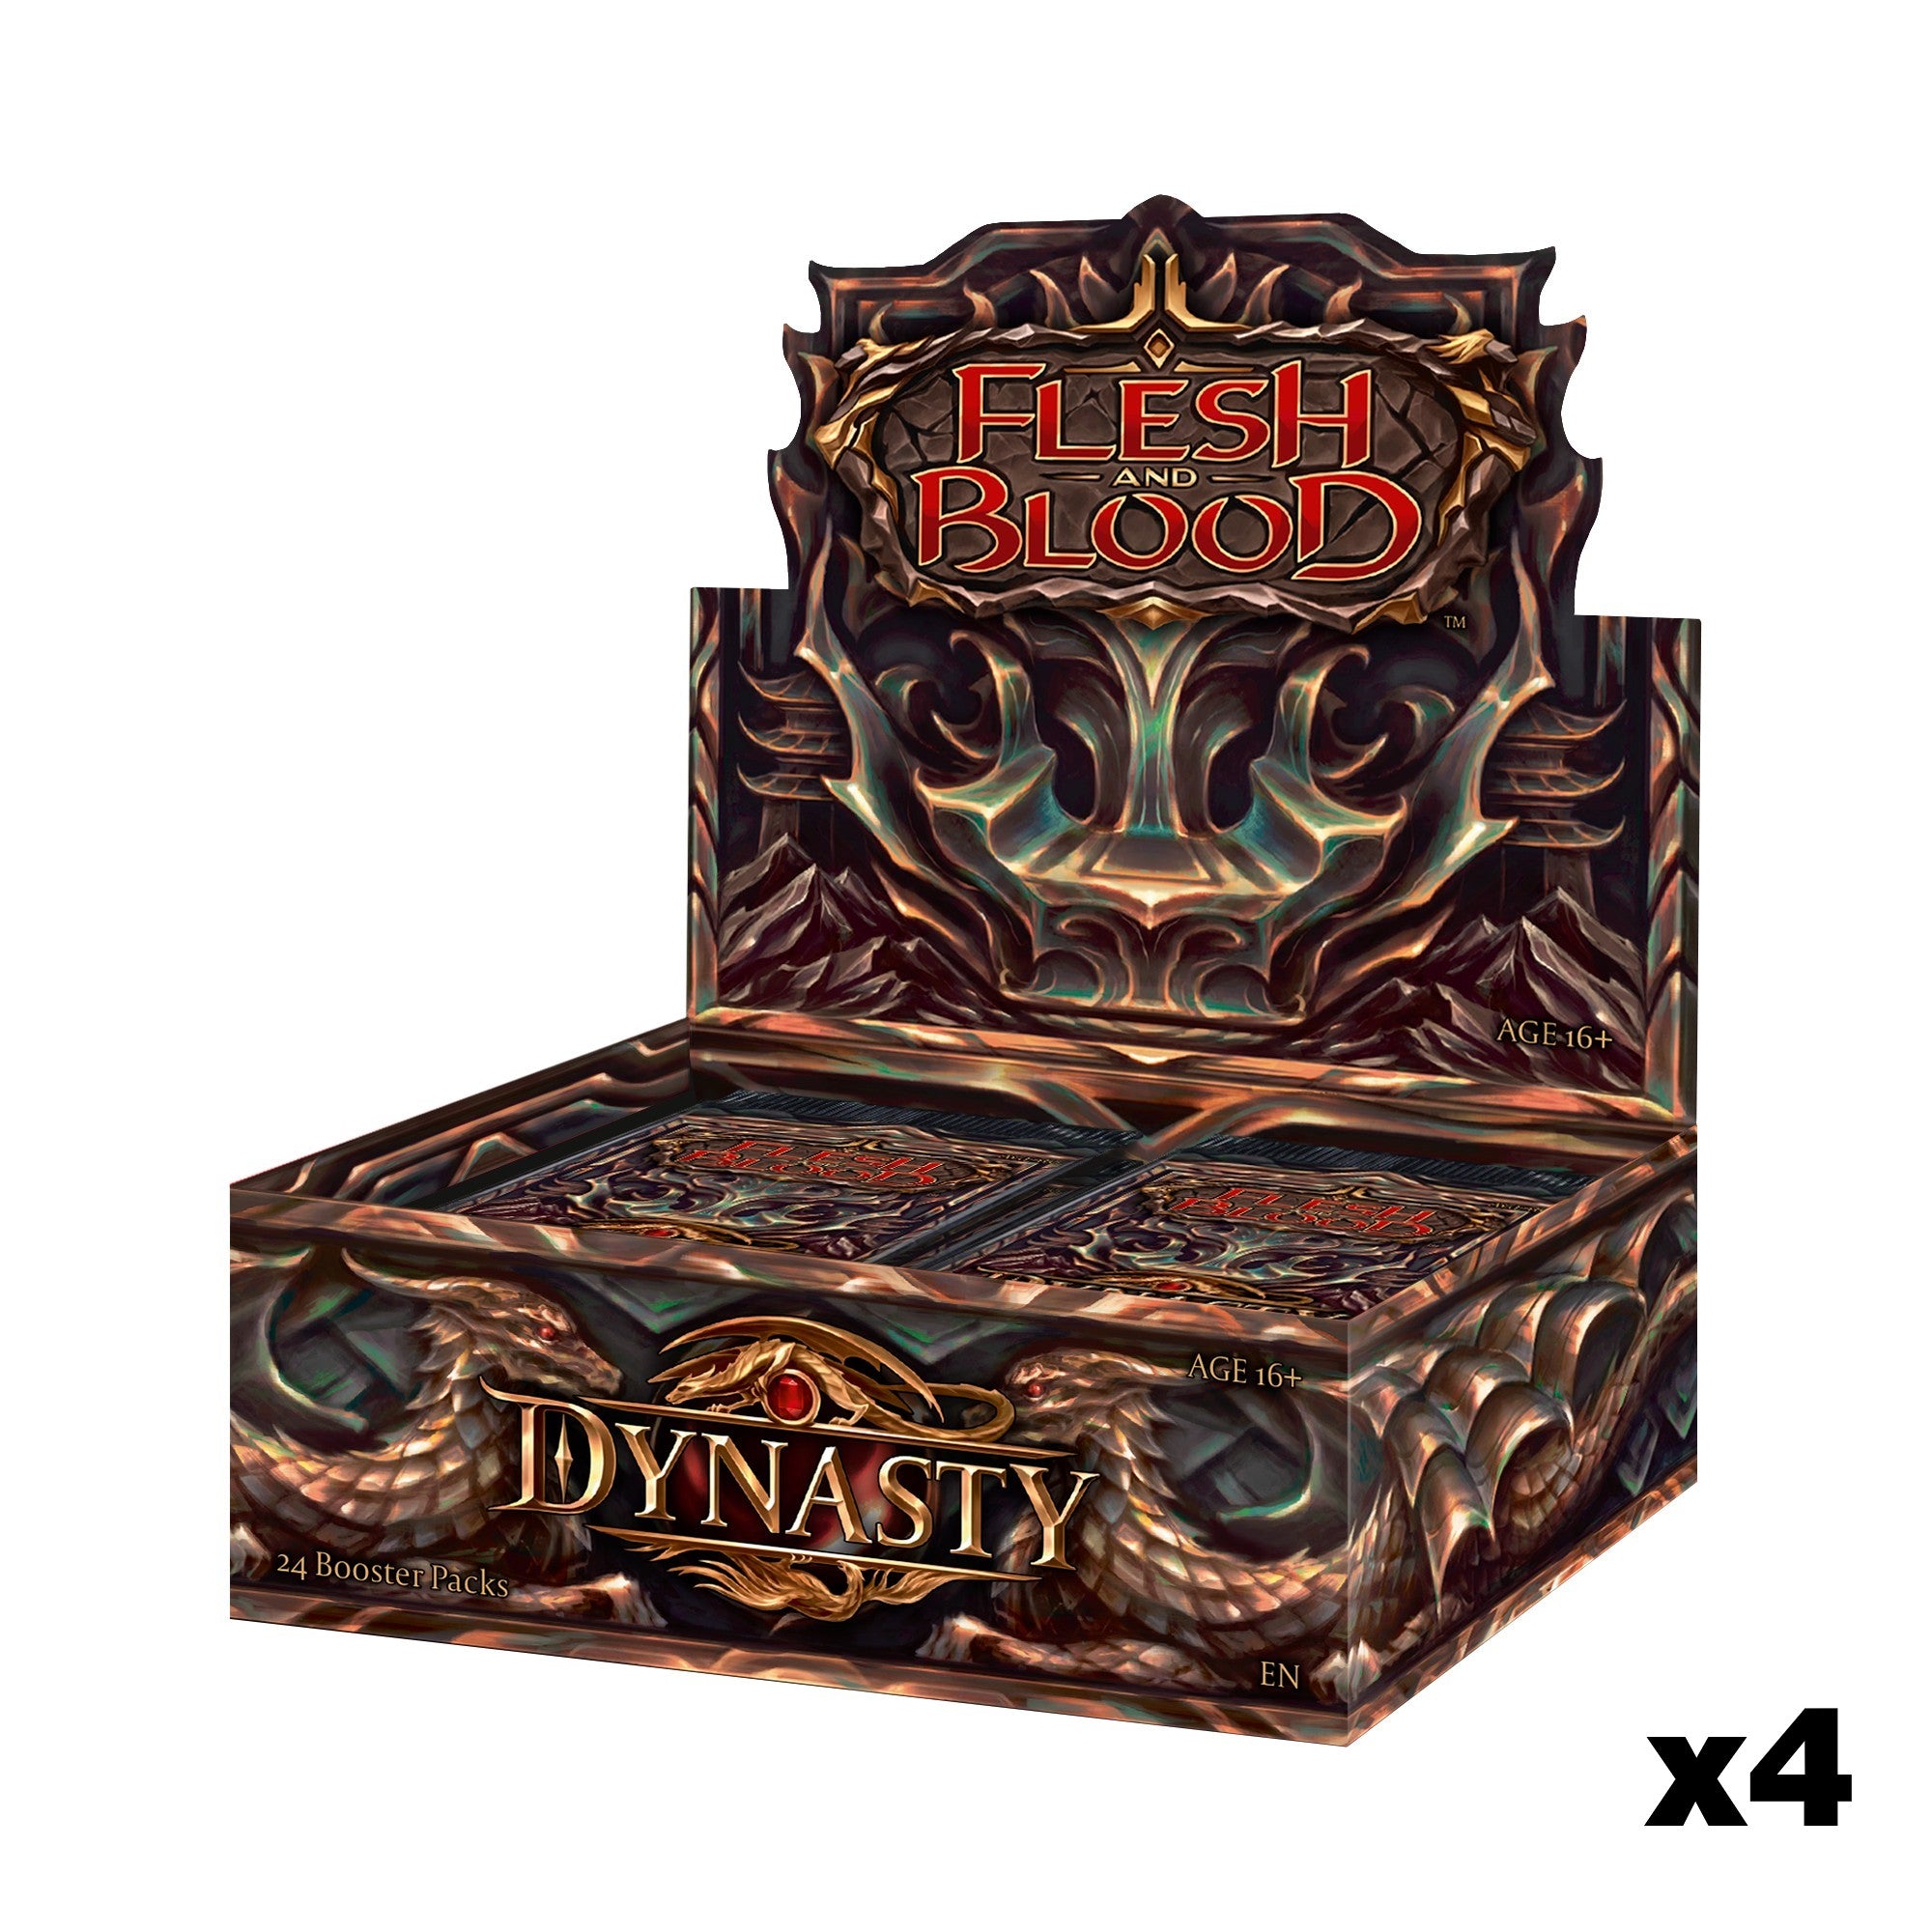 Flesh and Blood - Dynasty 4-Booster Box Sealed Case